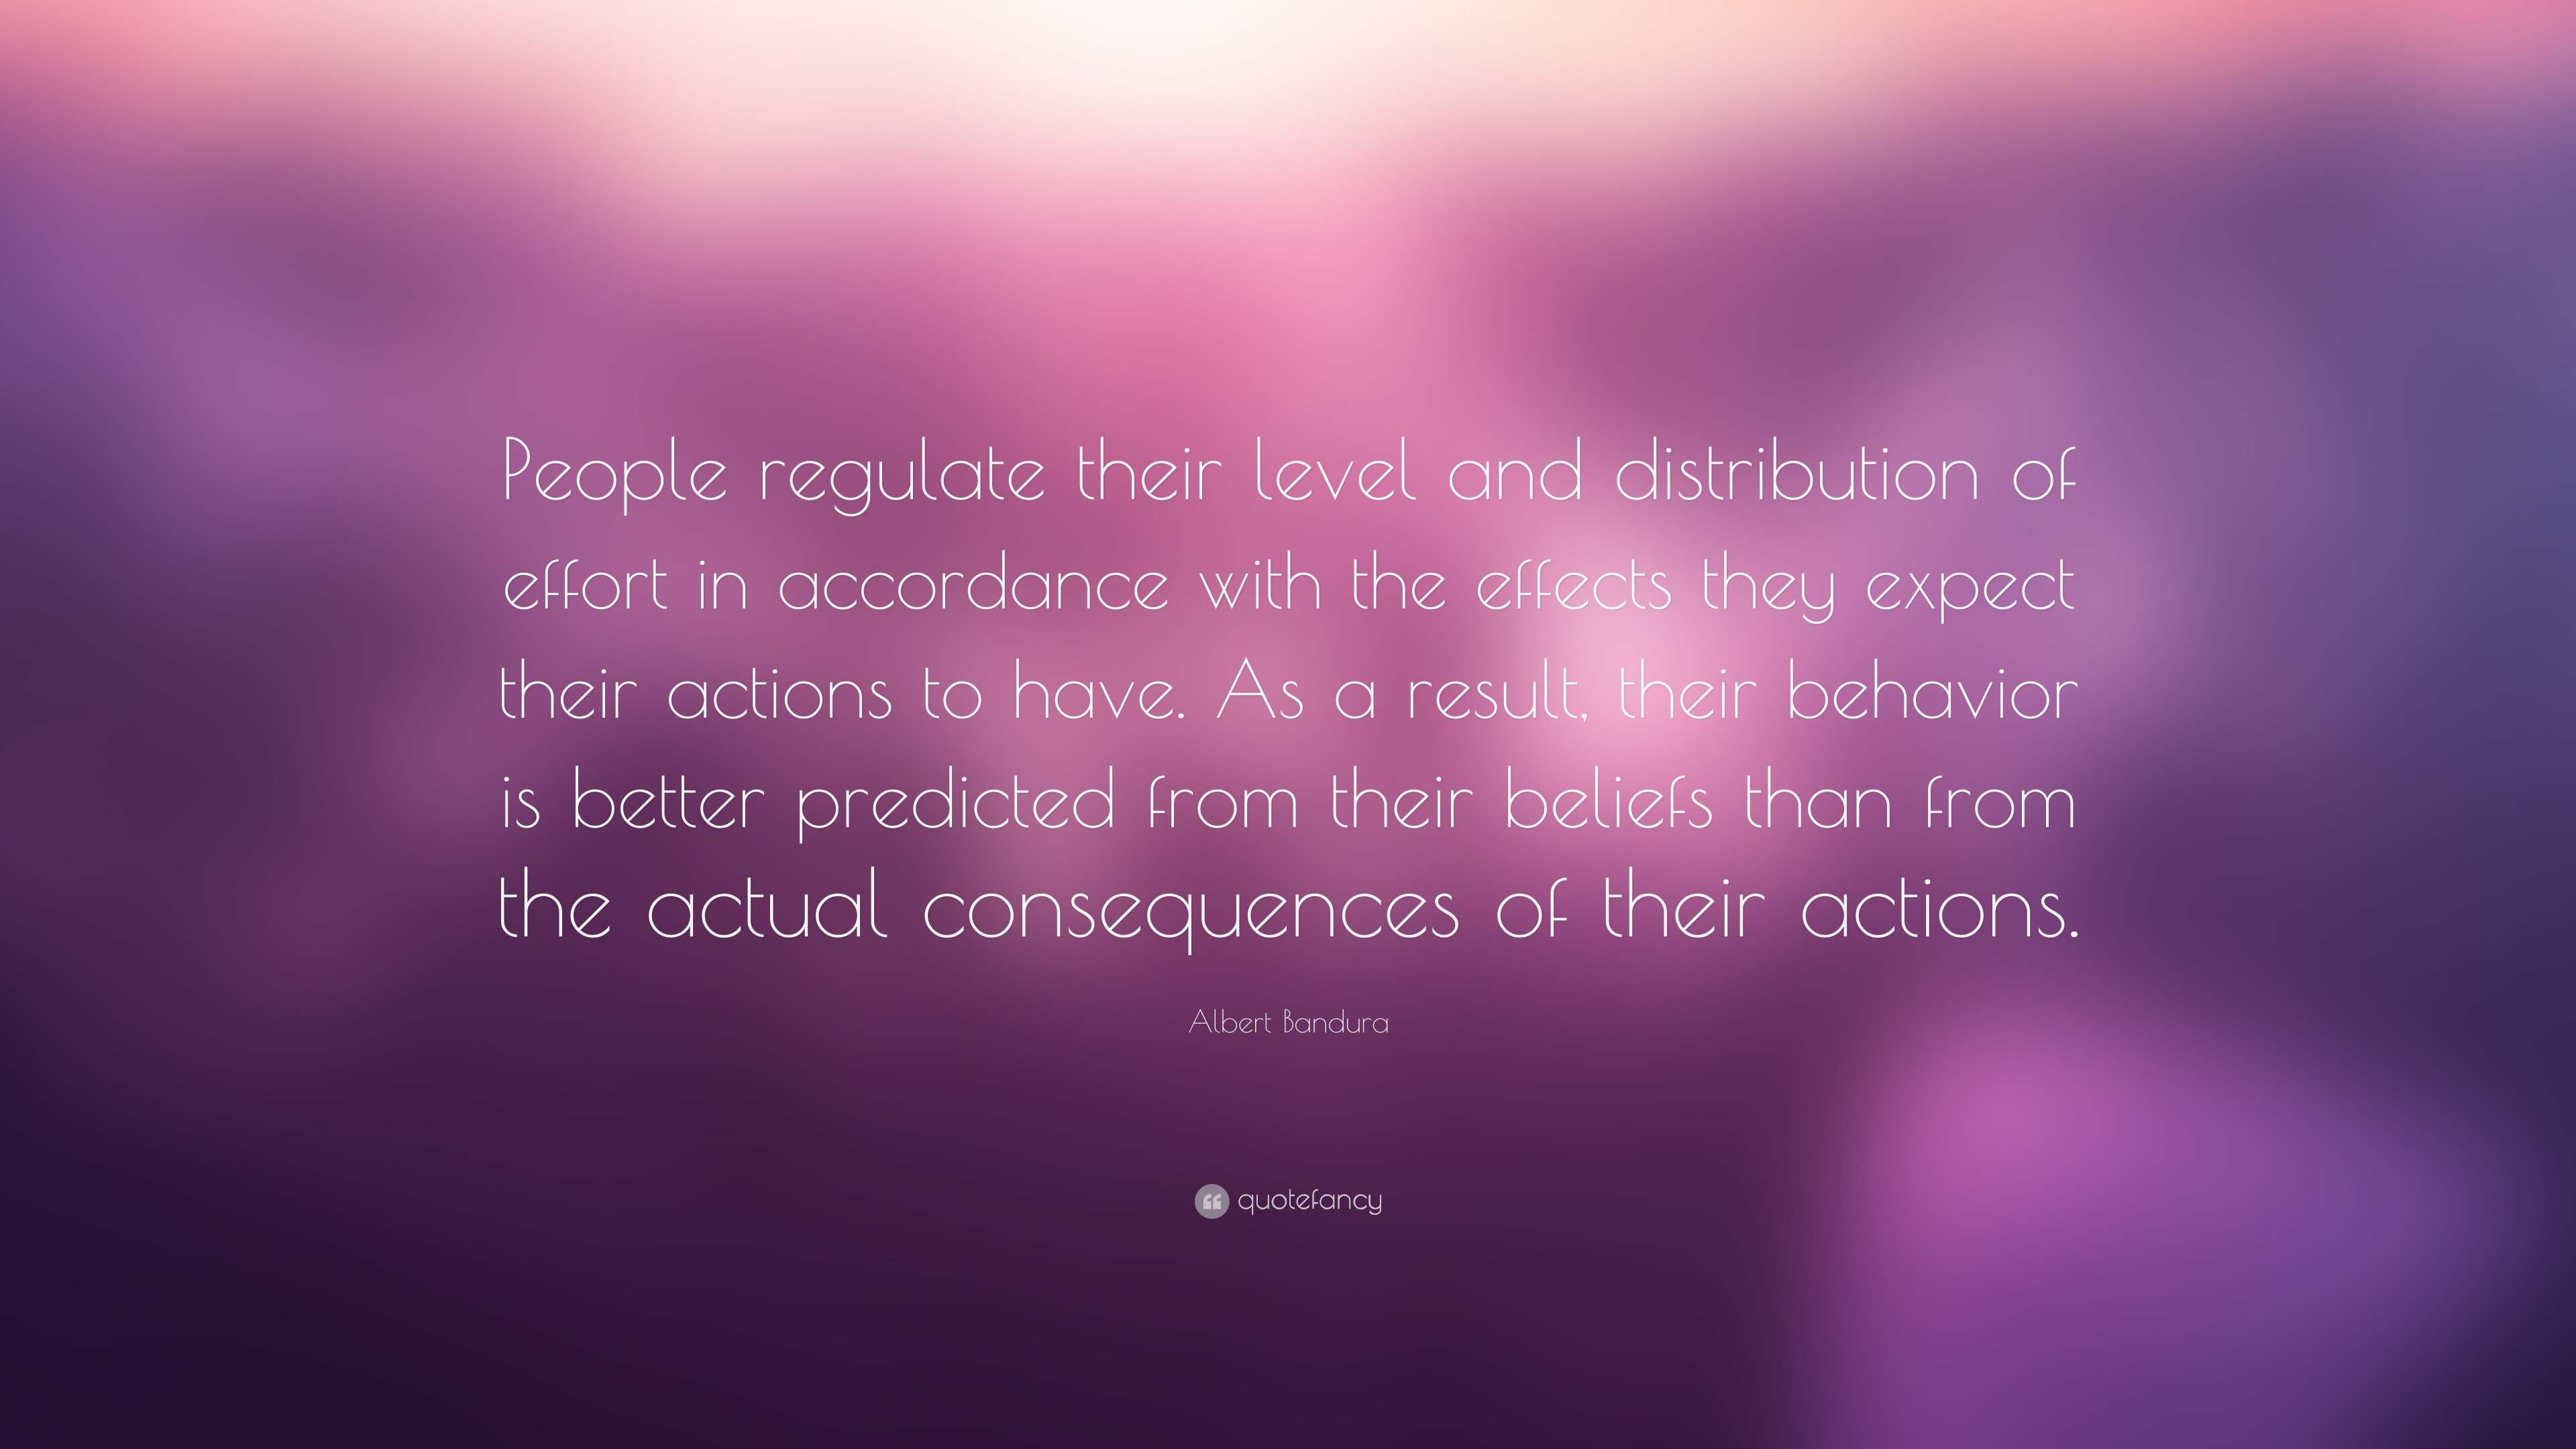 Albert Bandura Quote: “People regulate their level and distribution of ...